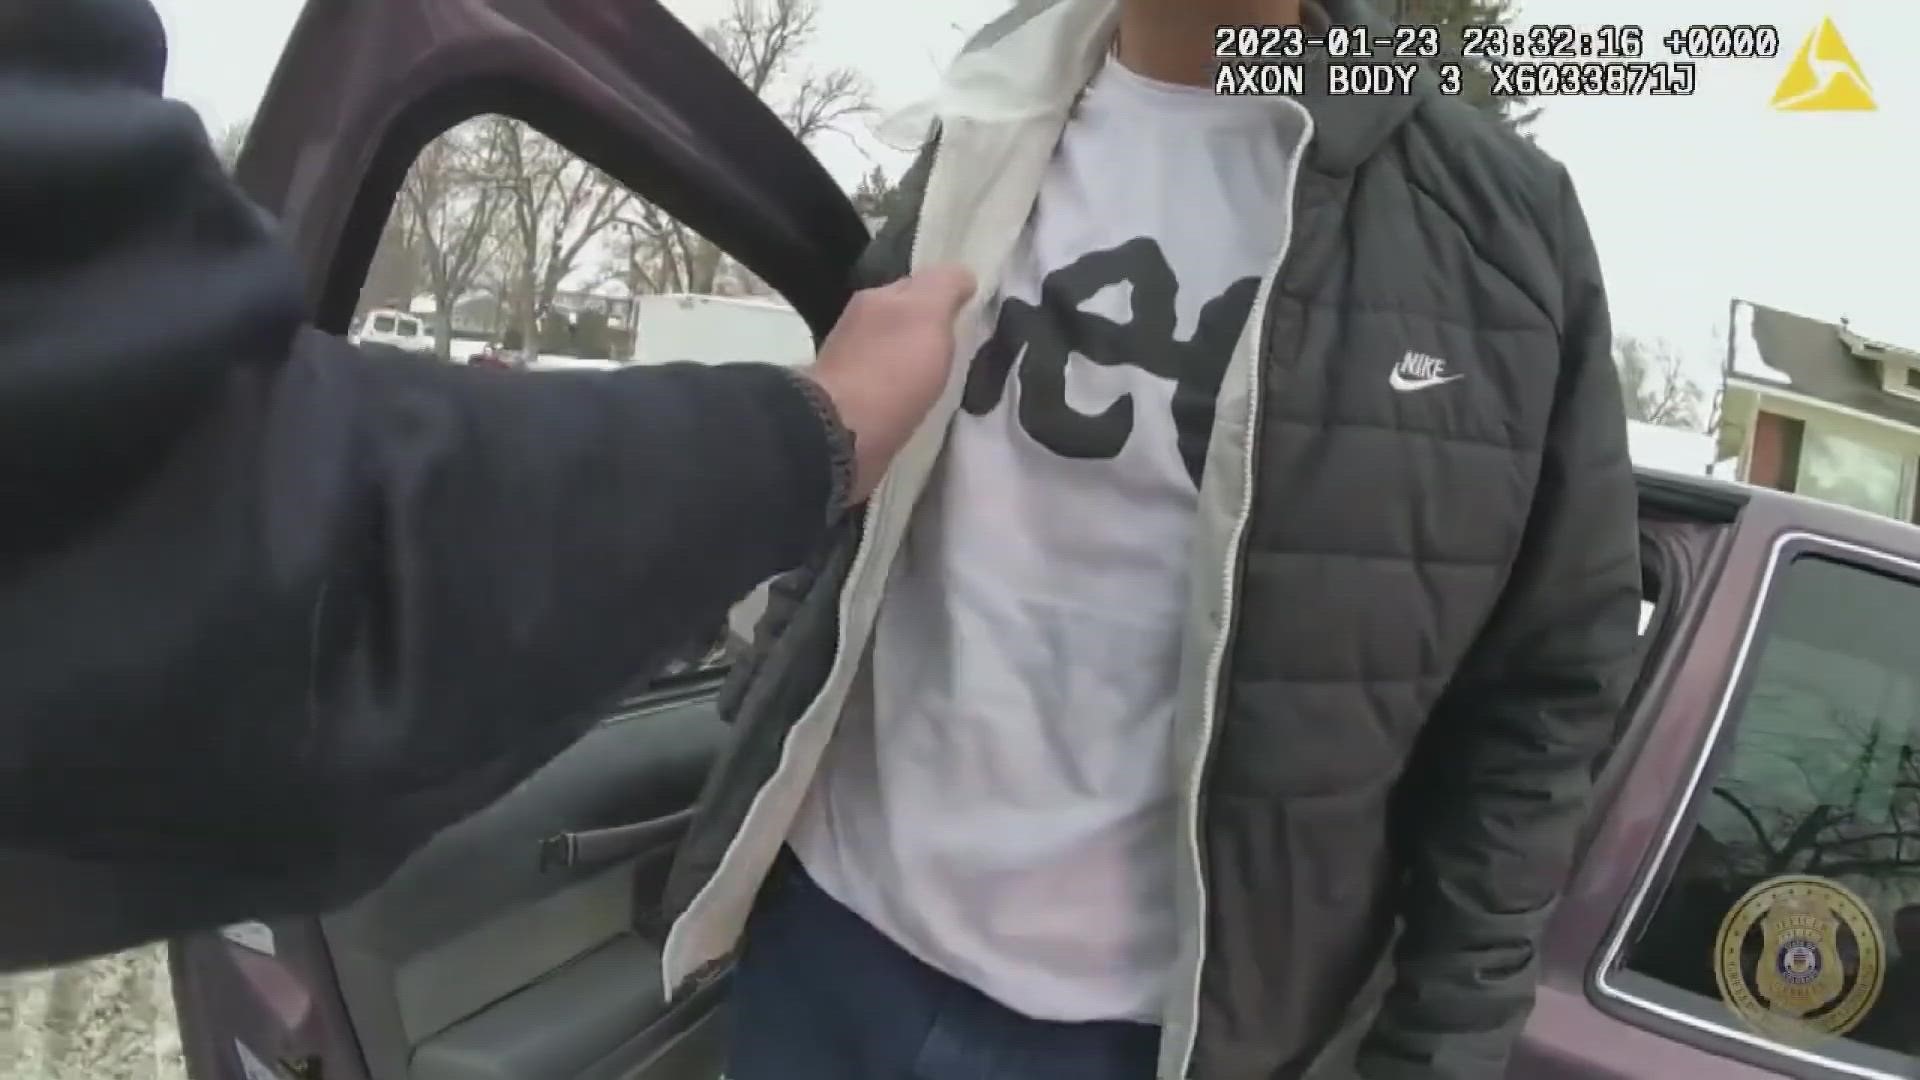 Greeley Police say a formal review is already in progress for an arrest video that went viral last week.